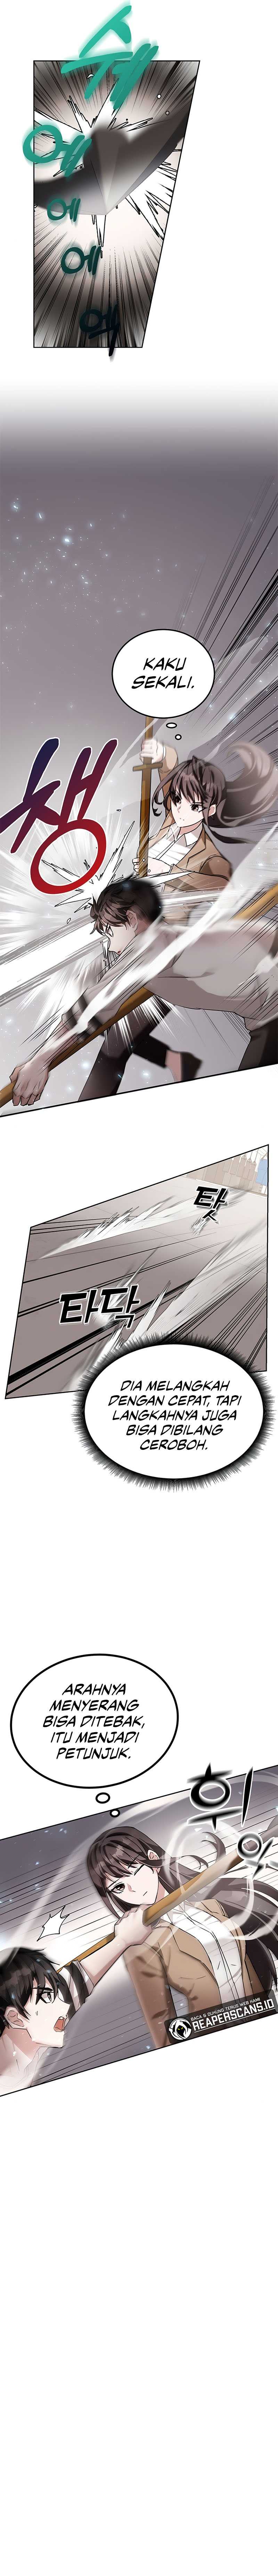 Transcension Academy Chapter 06